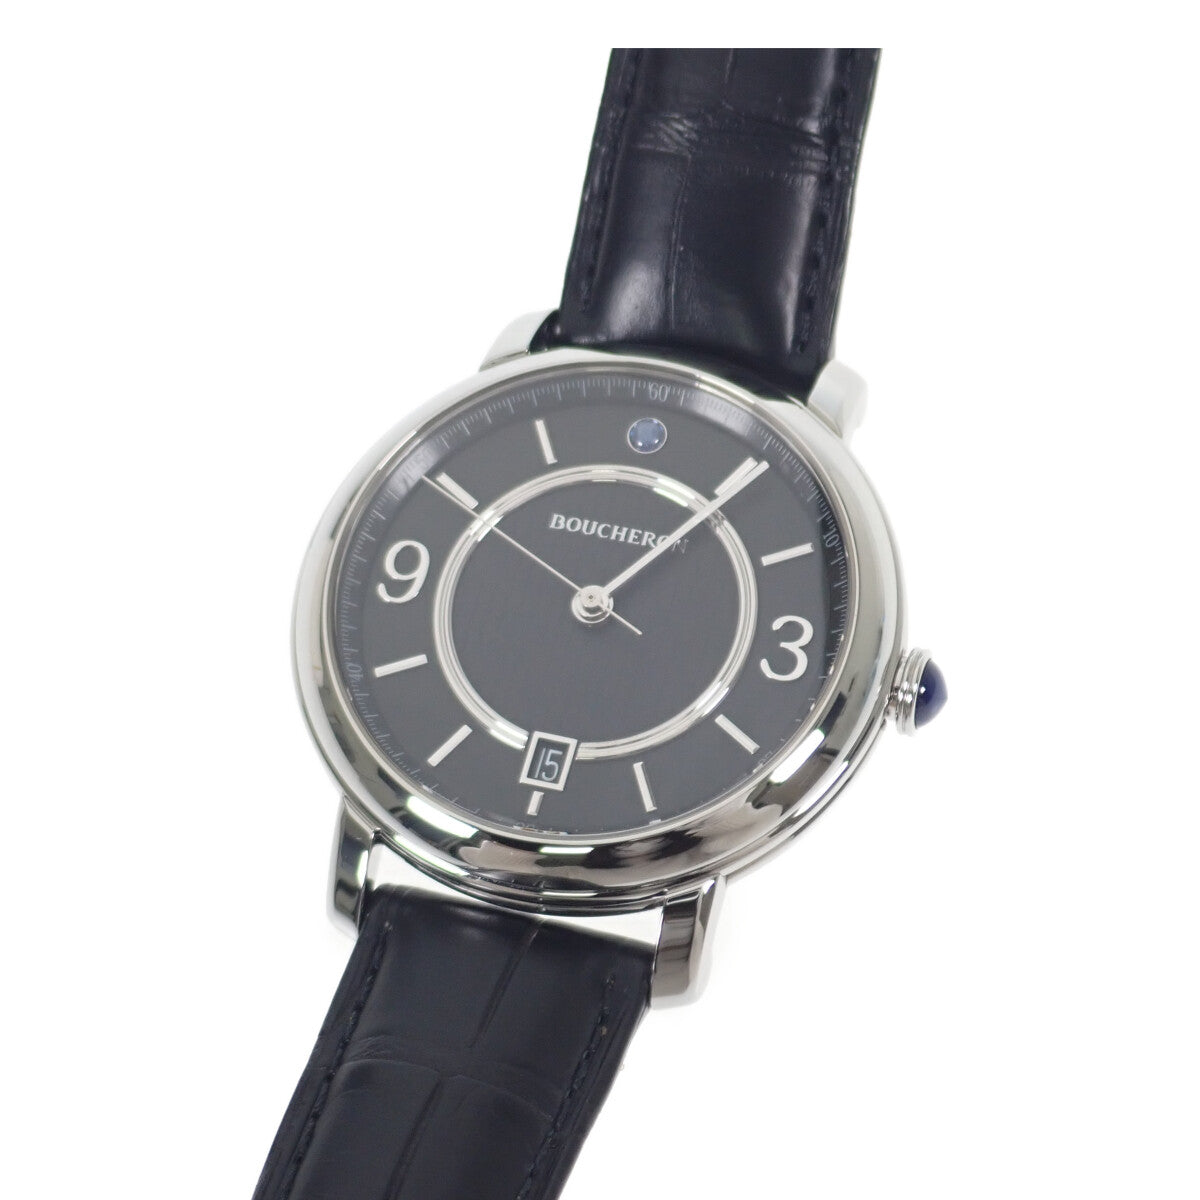 Boucheron  Boucheron Epure Stainless Steel Men’s Watch with Black Leather Strap and Black Dial WA021202 in Excellent condition